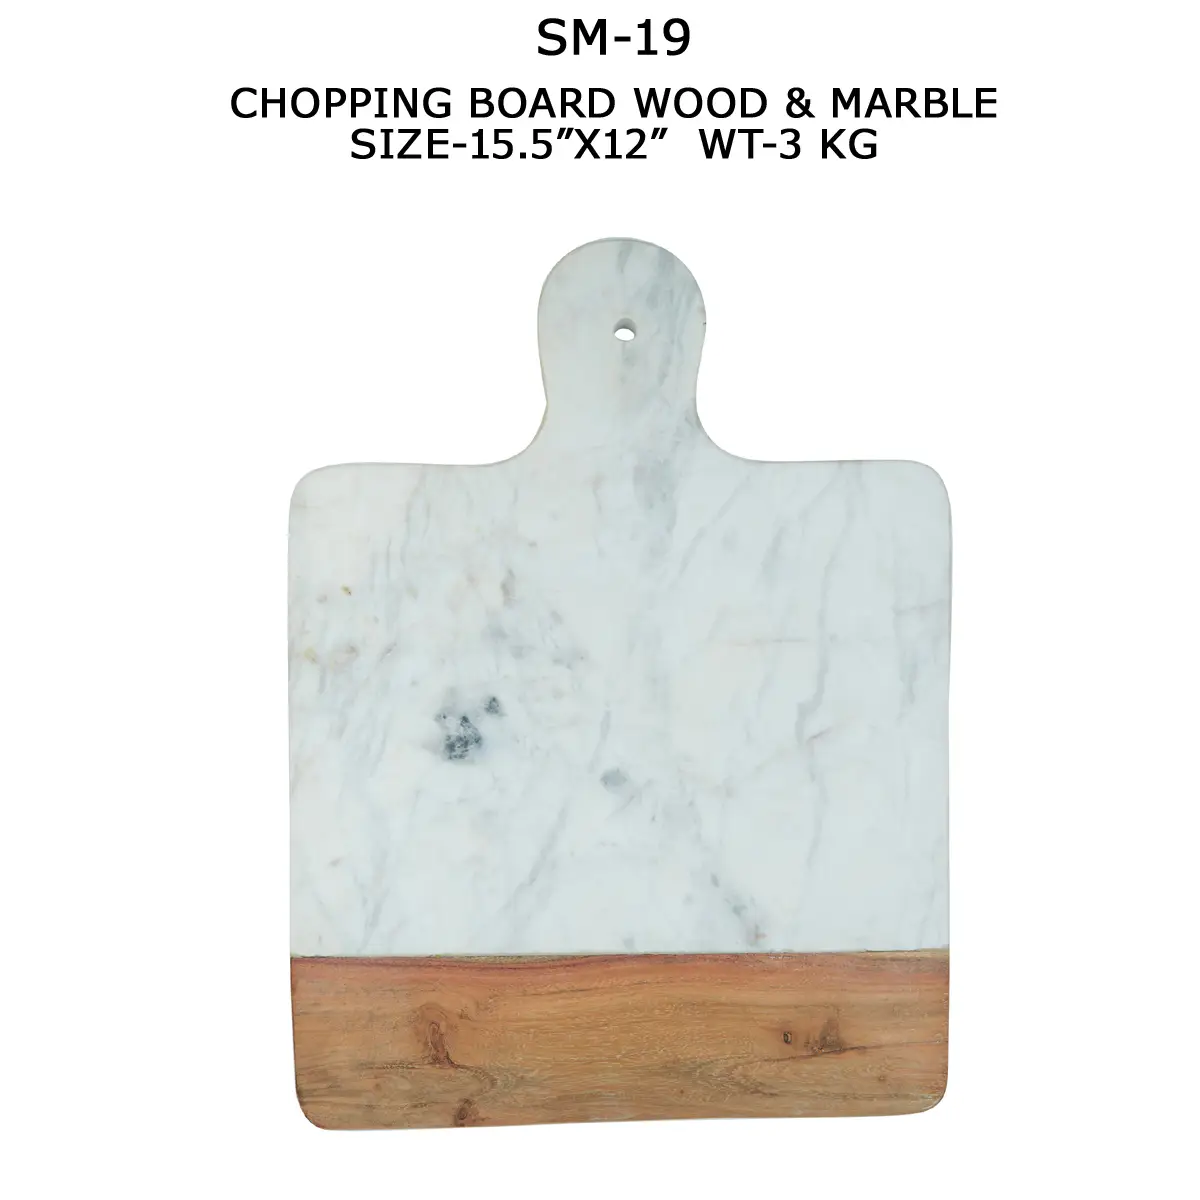 CHOPPING BOARD WITH HANDLE WOOD & MARBLE